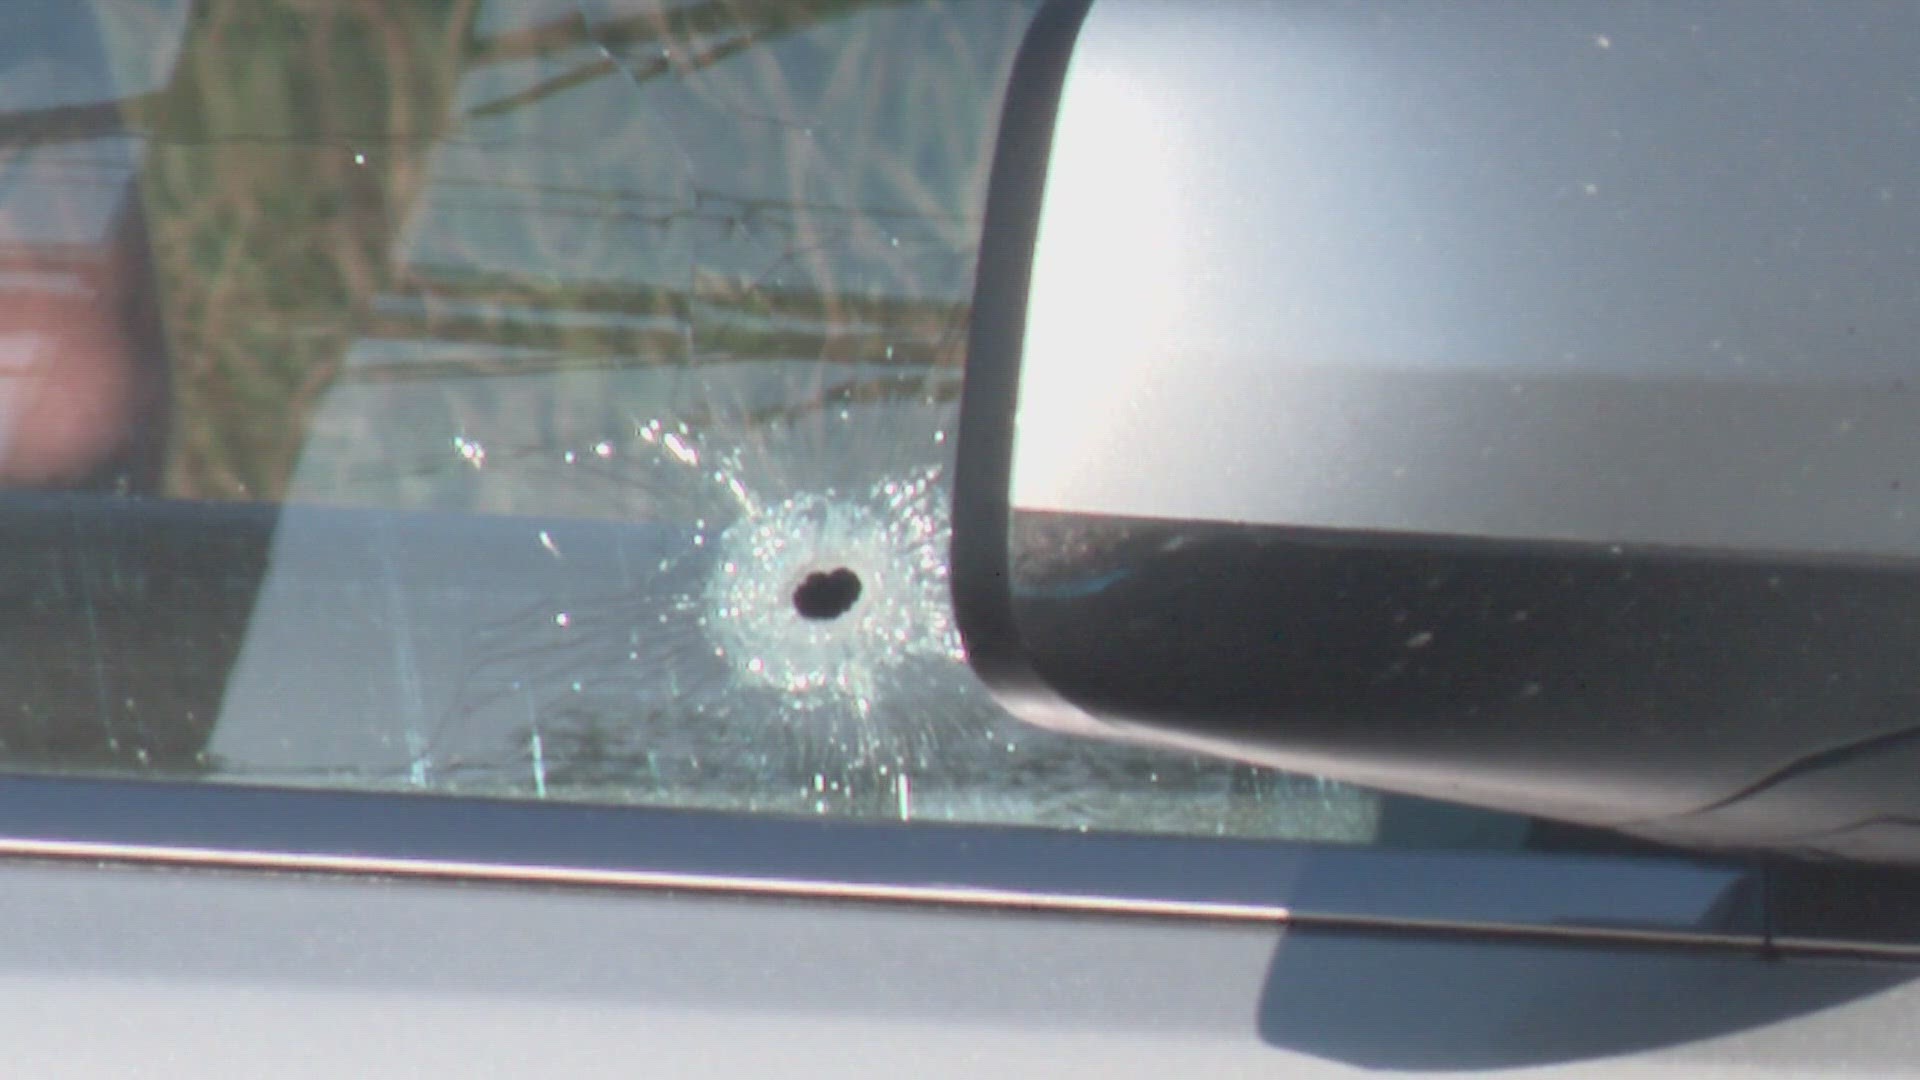 Police found that the SUV was shot at, with at least one bullet striking the front passenger window.